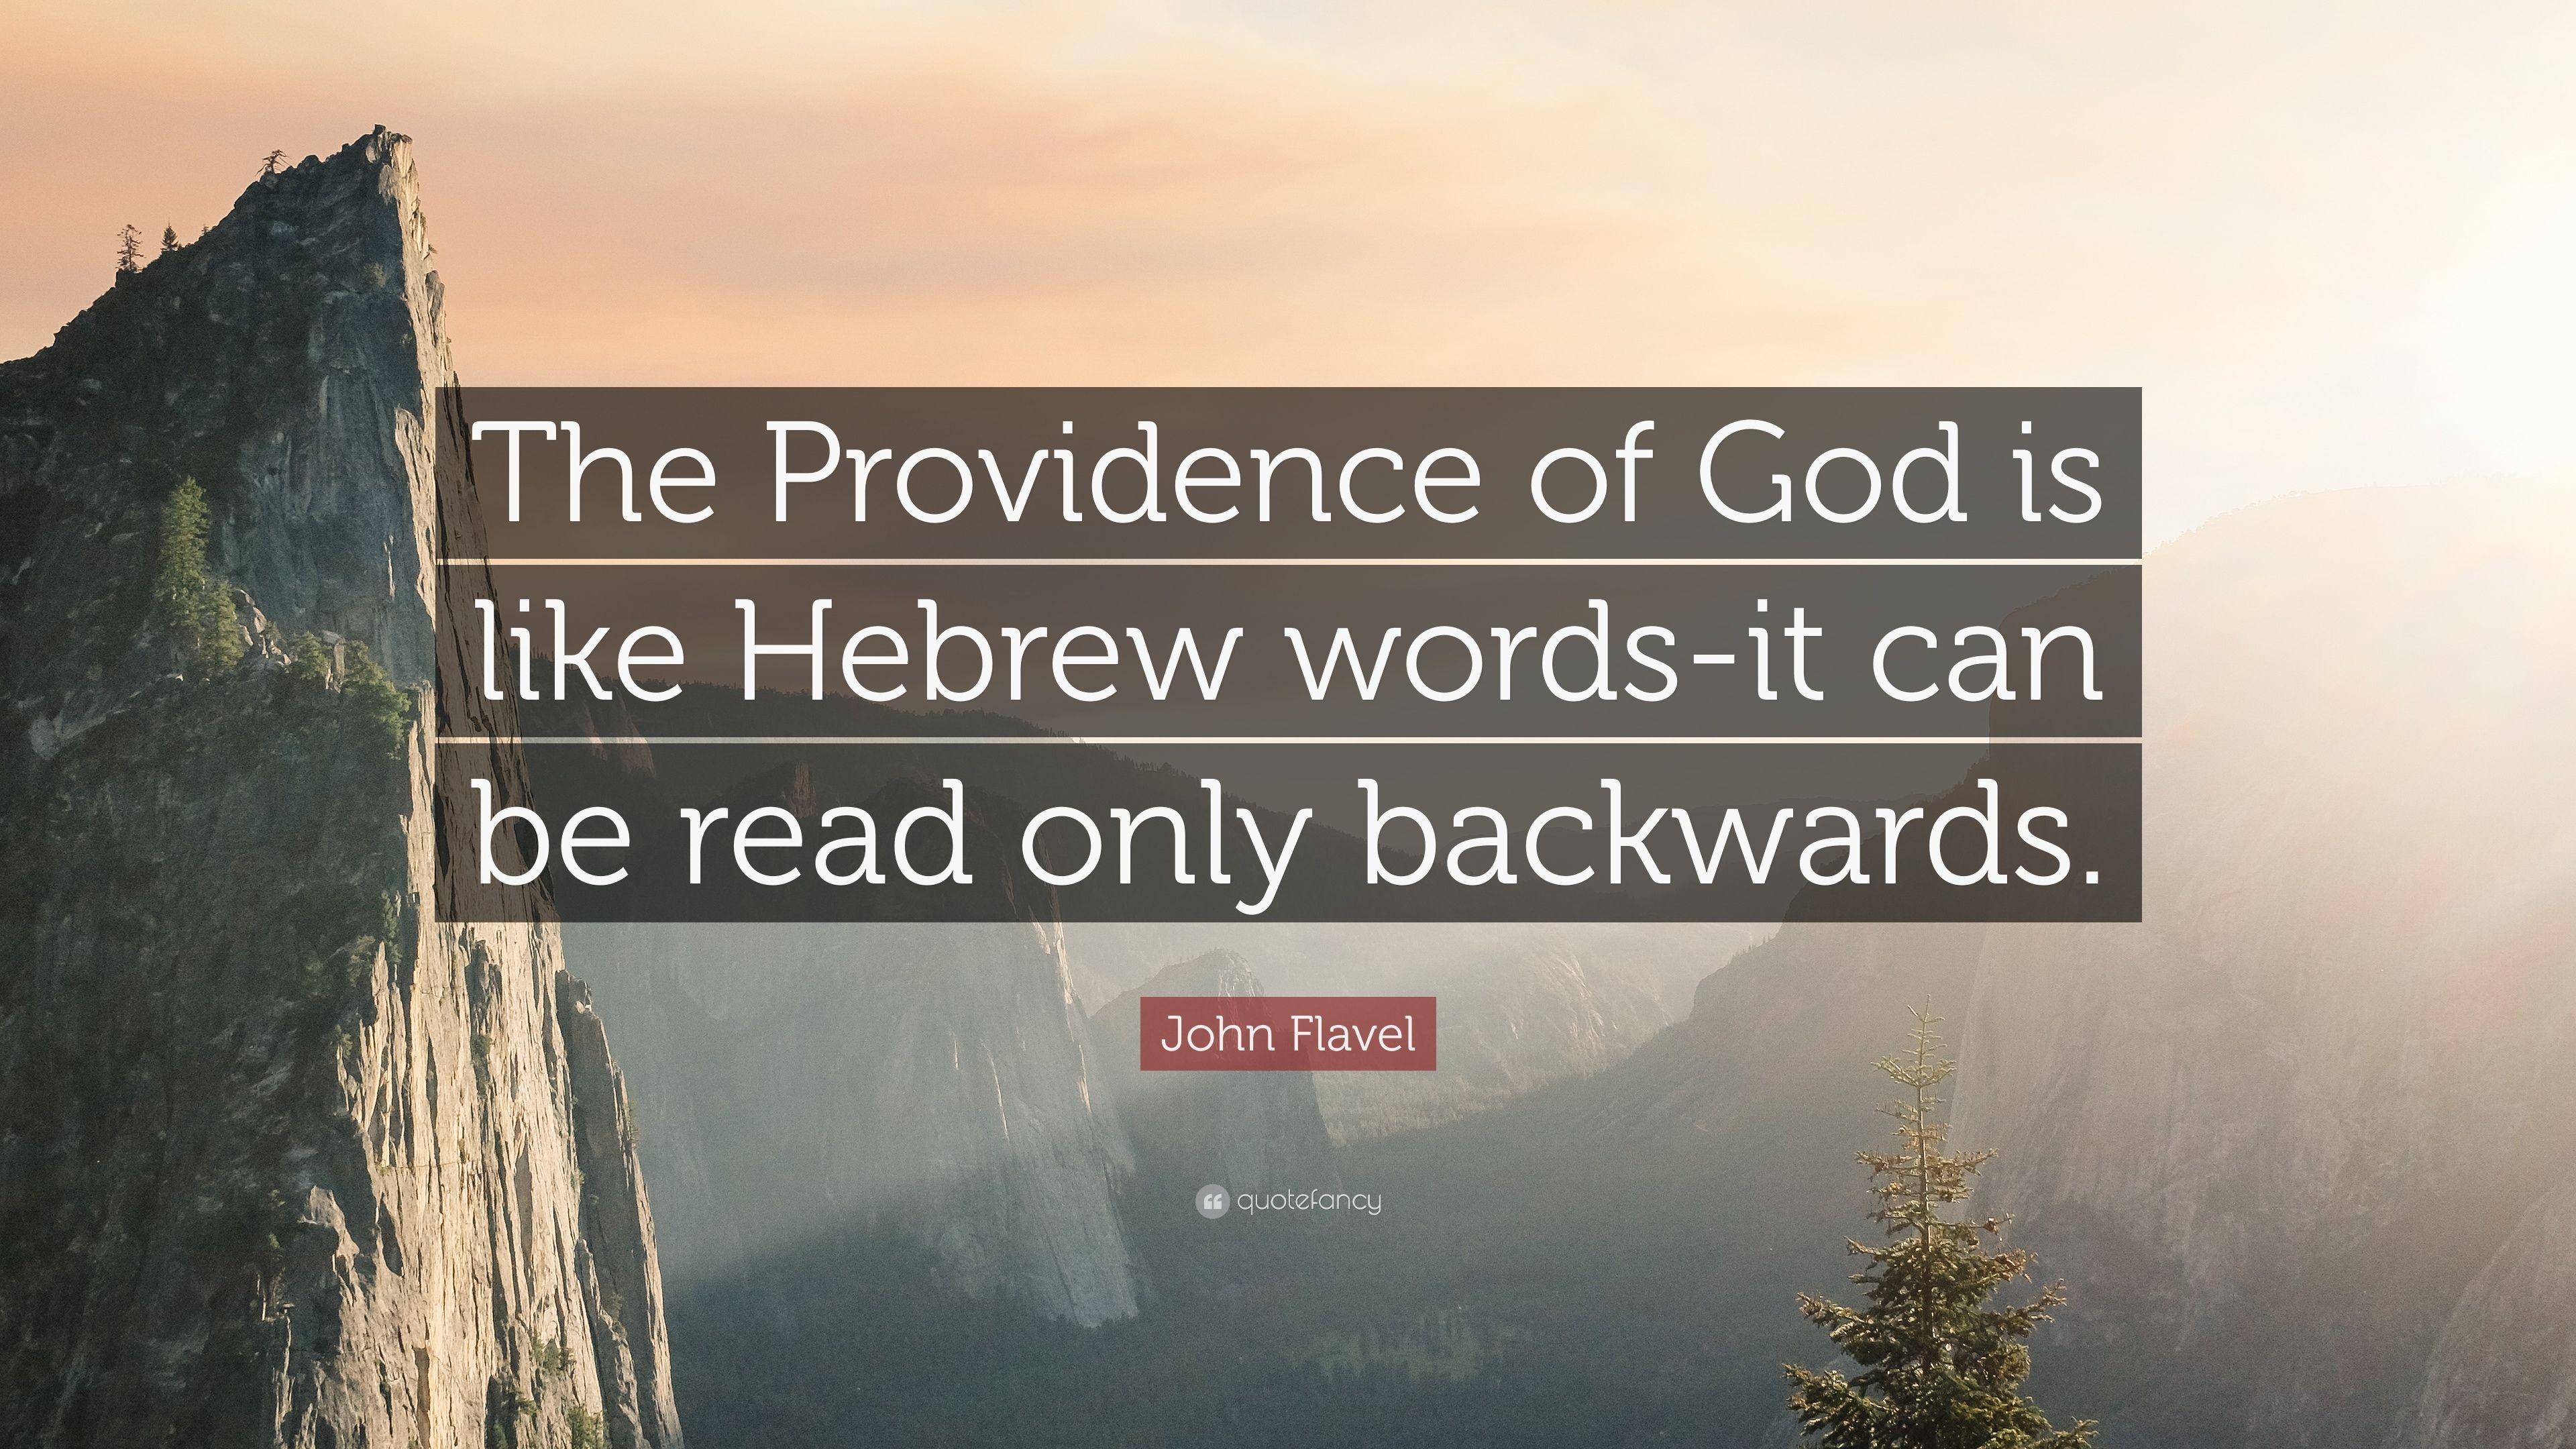 John Flavel Quote: “The Providence Of God Is Like Hebrew Words It